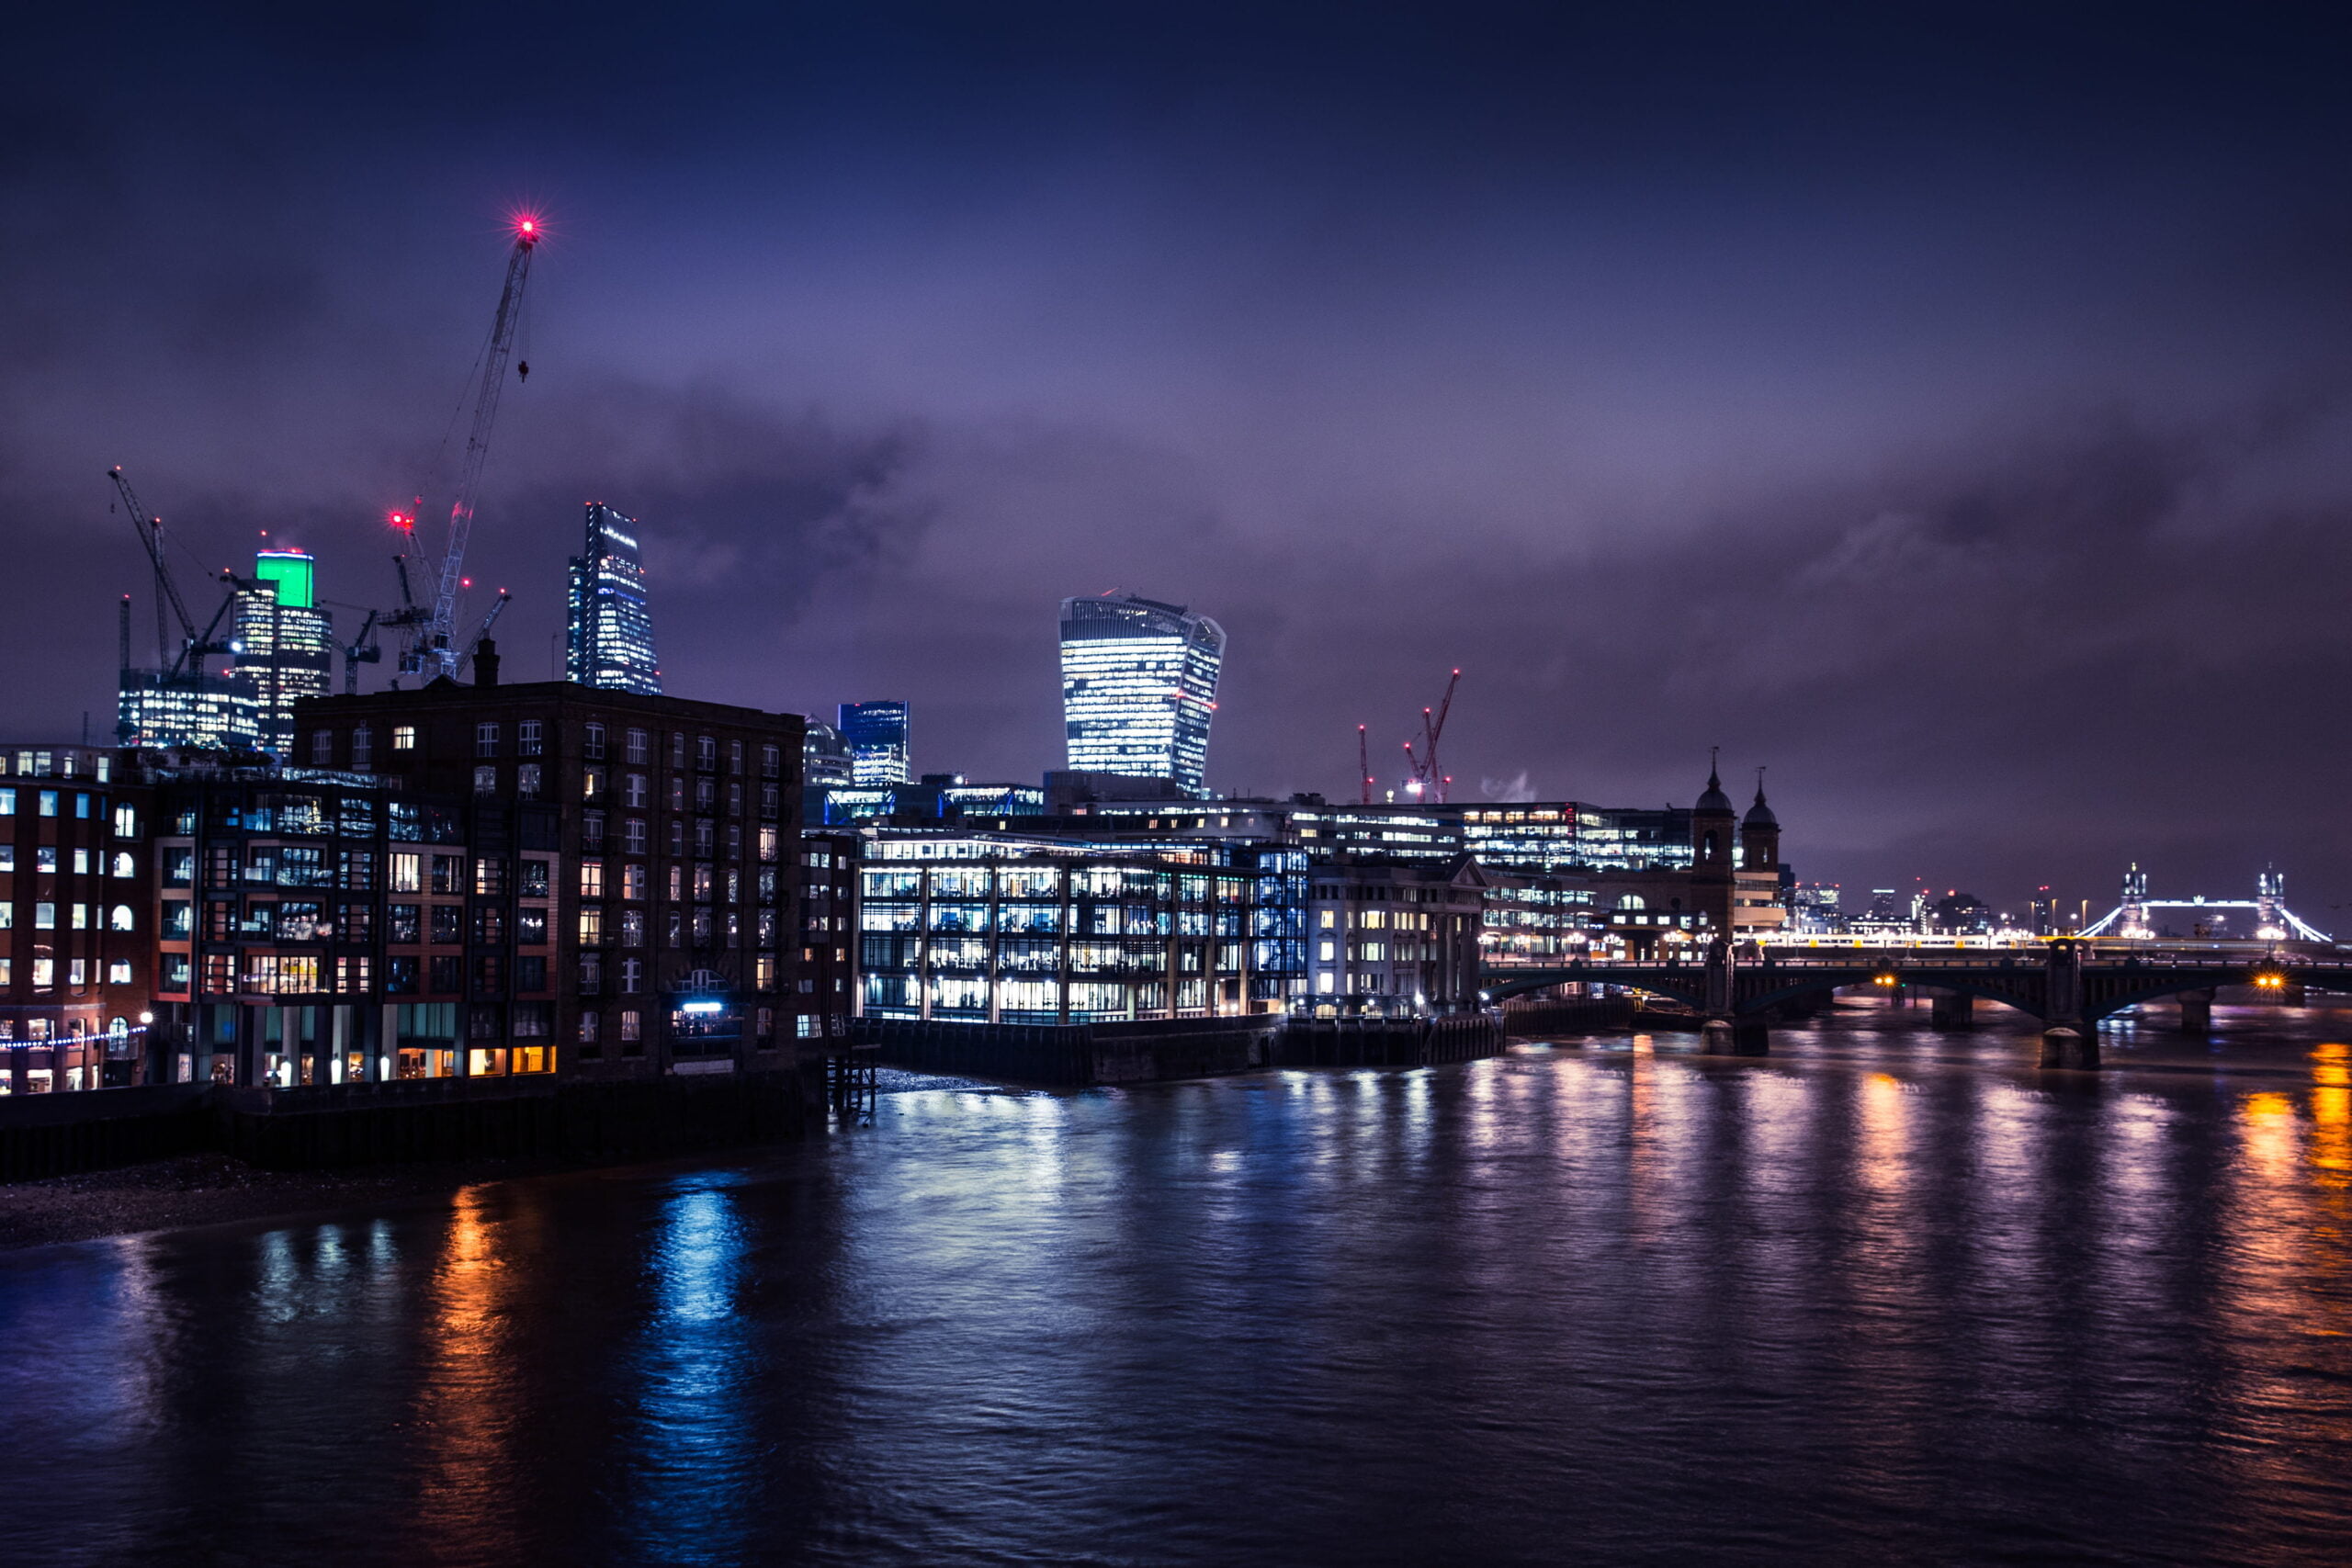 Night view of the River Thames